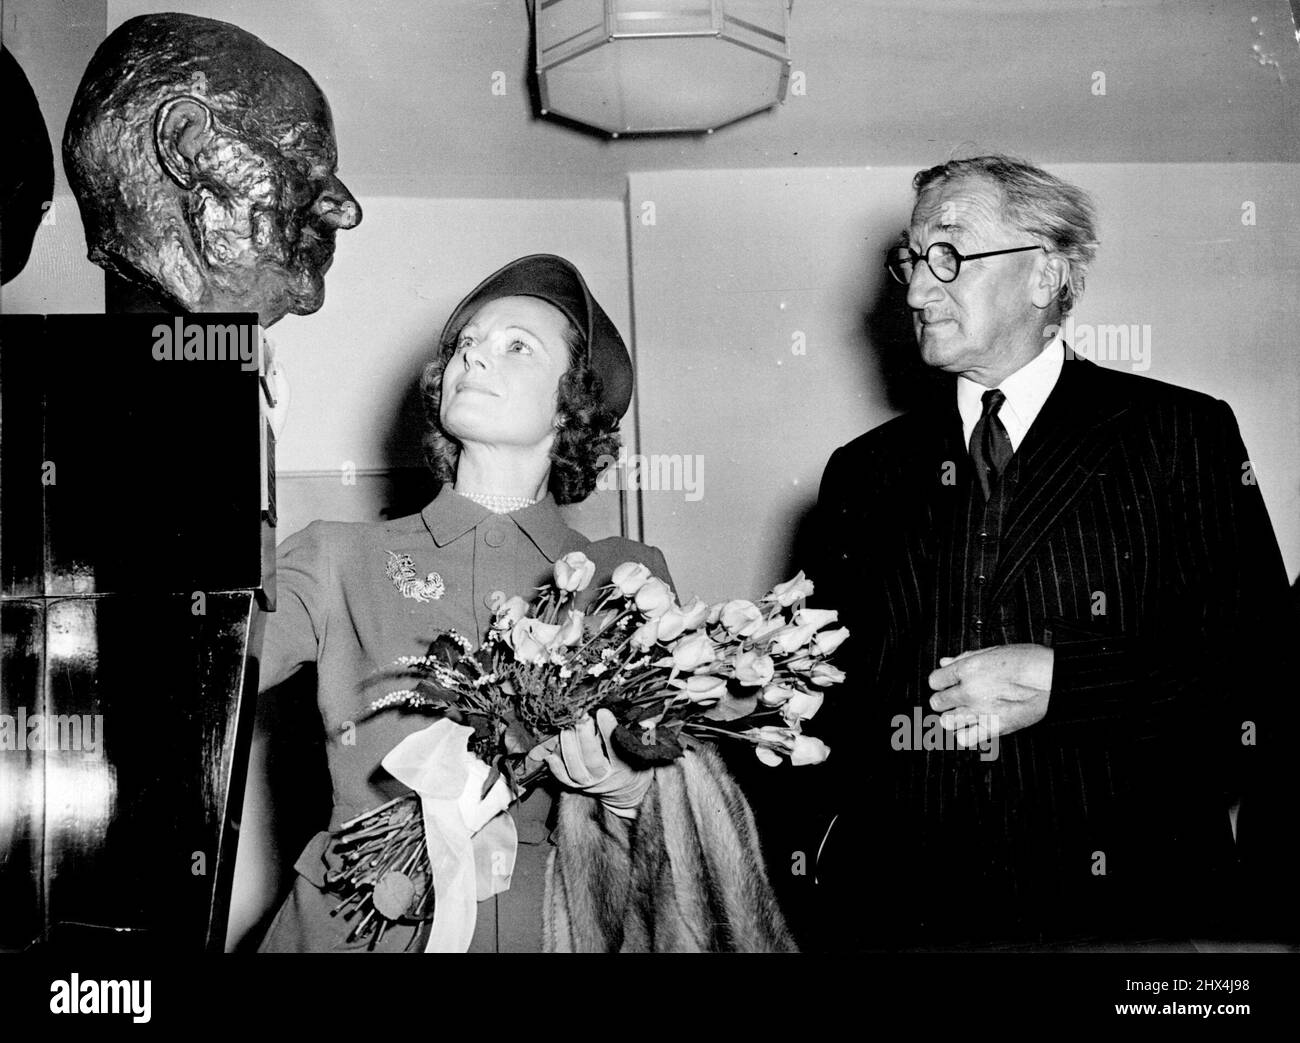 Tribute To C. B. ***** Sir Alan Herbert, M.P., who was closely sentenced with the great showman, with Anna Neagle, a former ***** Young Lady, after she had unveiled the bust of C.B. in the foyer of the Adelph Theatre today. Sir Alan Herbert - 'It does not worry me that Australians say 'aw' instead of 'oh'. Who are we to talk of accents'?. November 02, 1955. Stock Photo